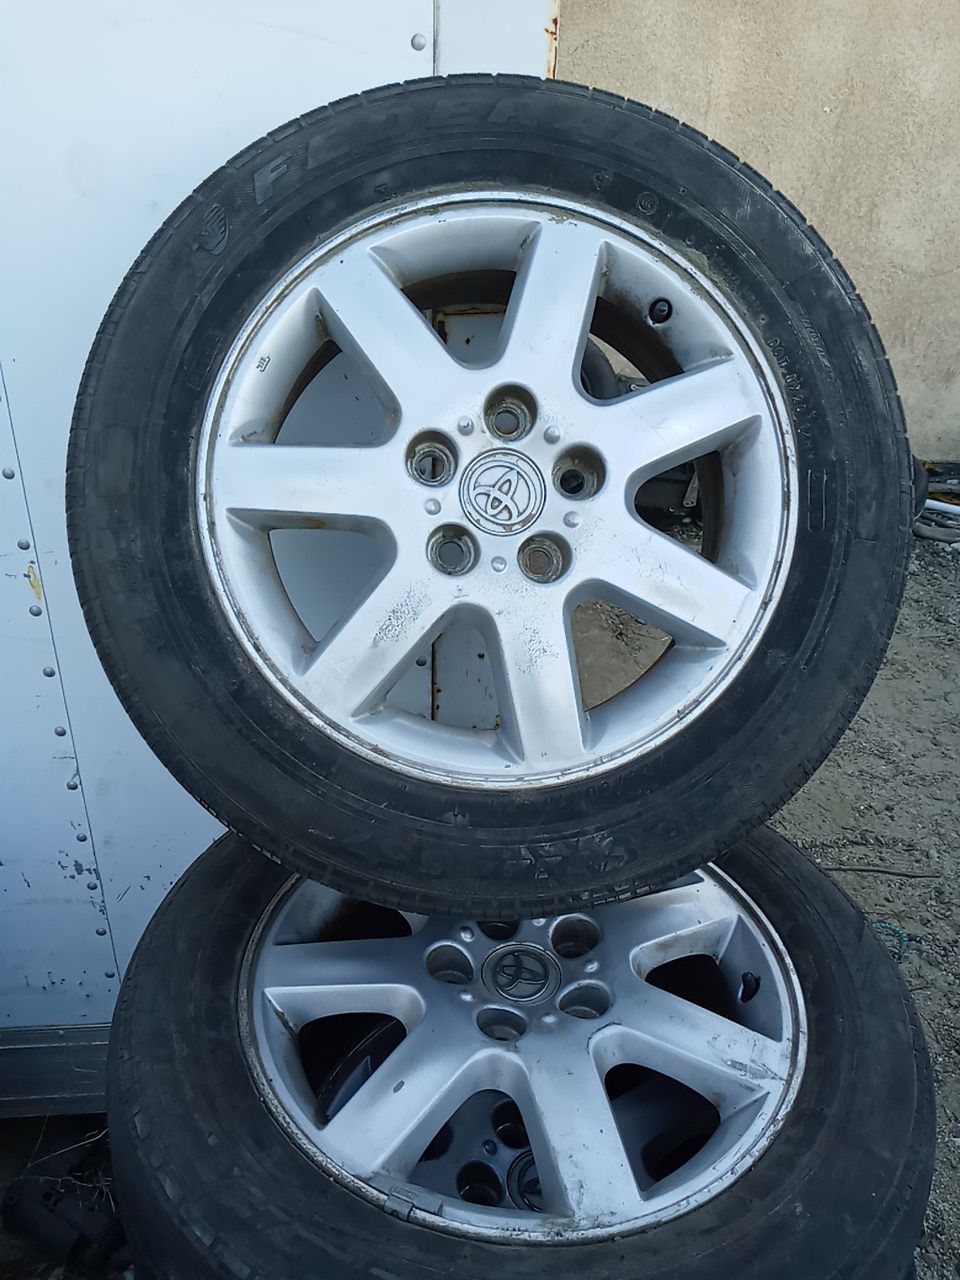 Toyota Camry rims 08-09 size 16